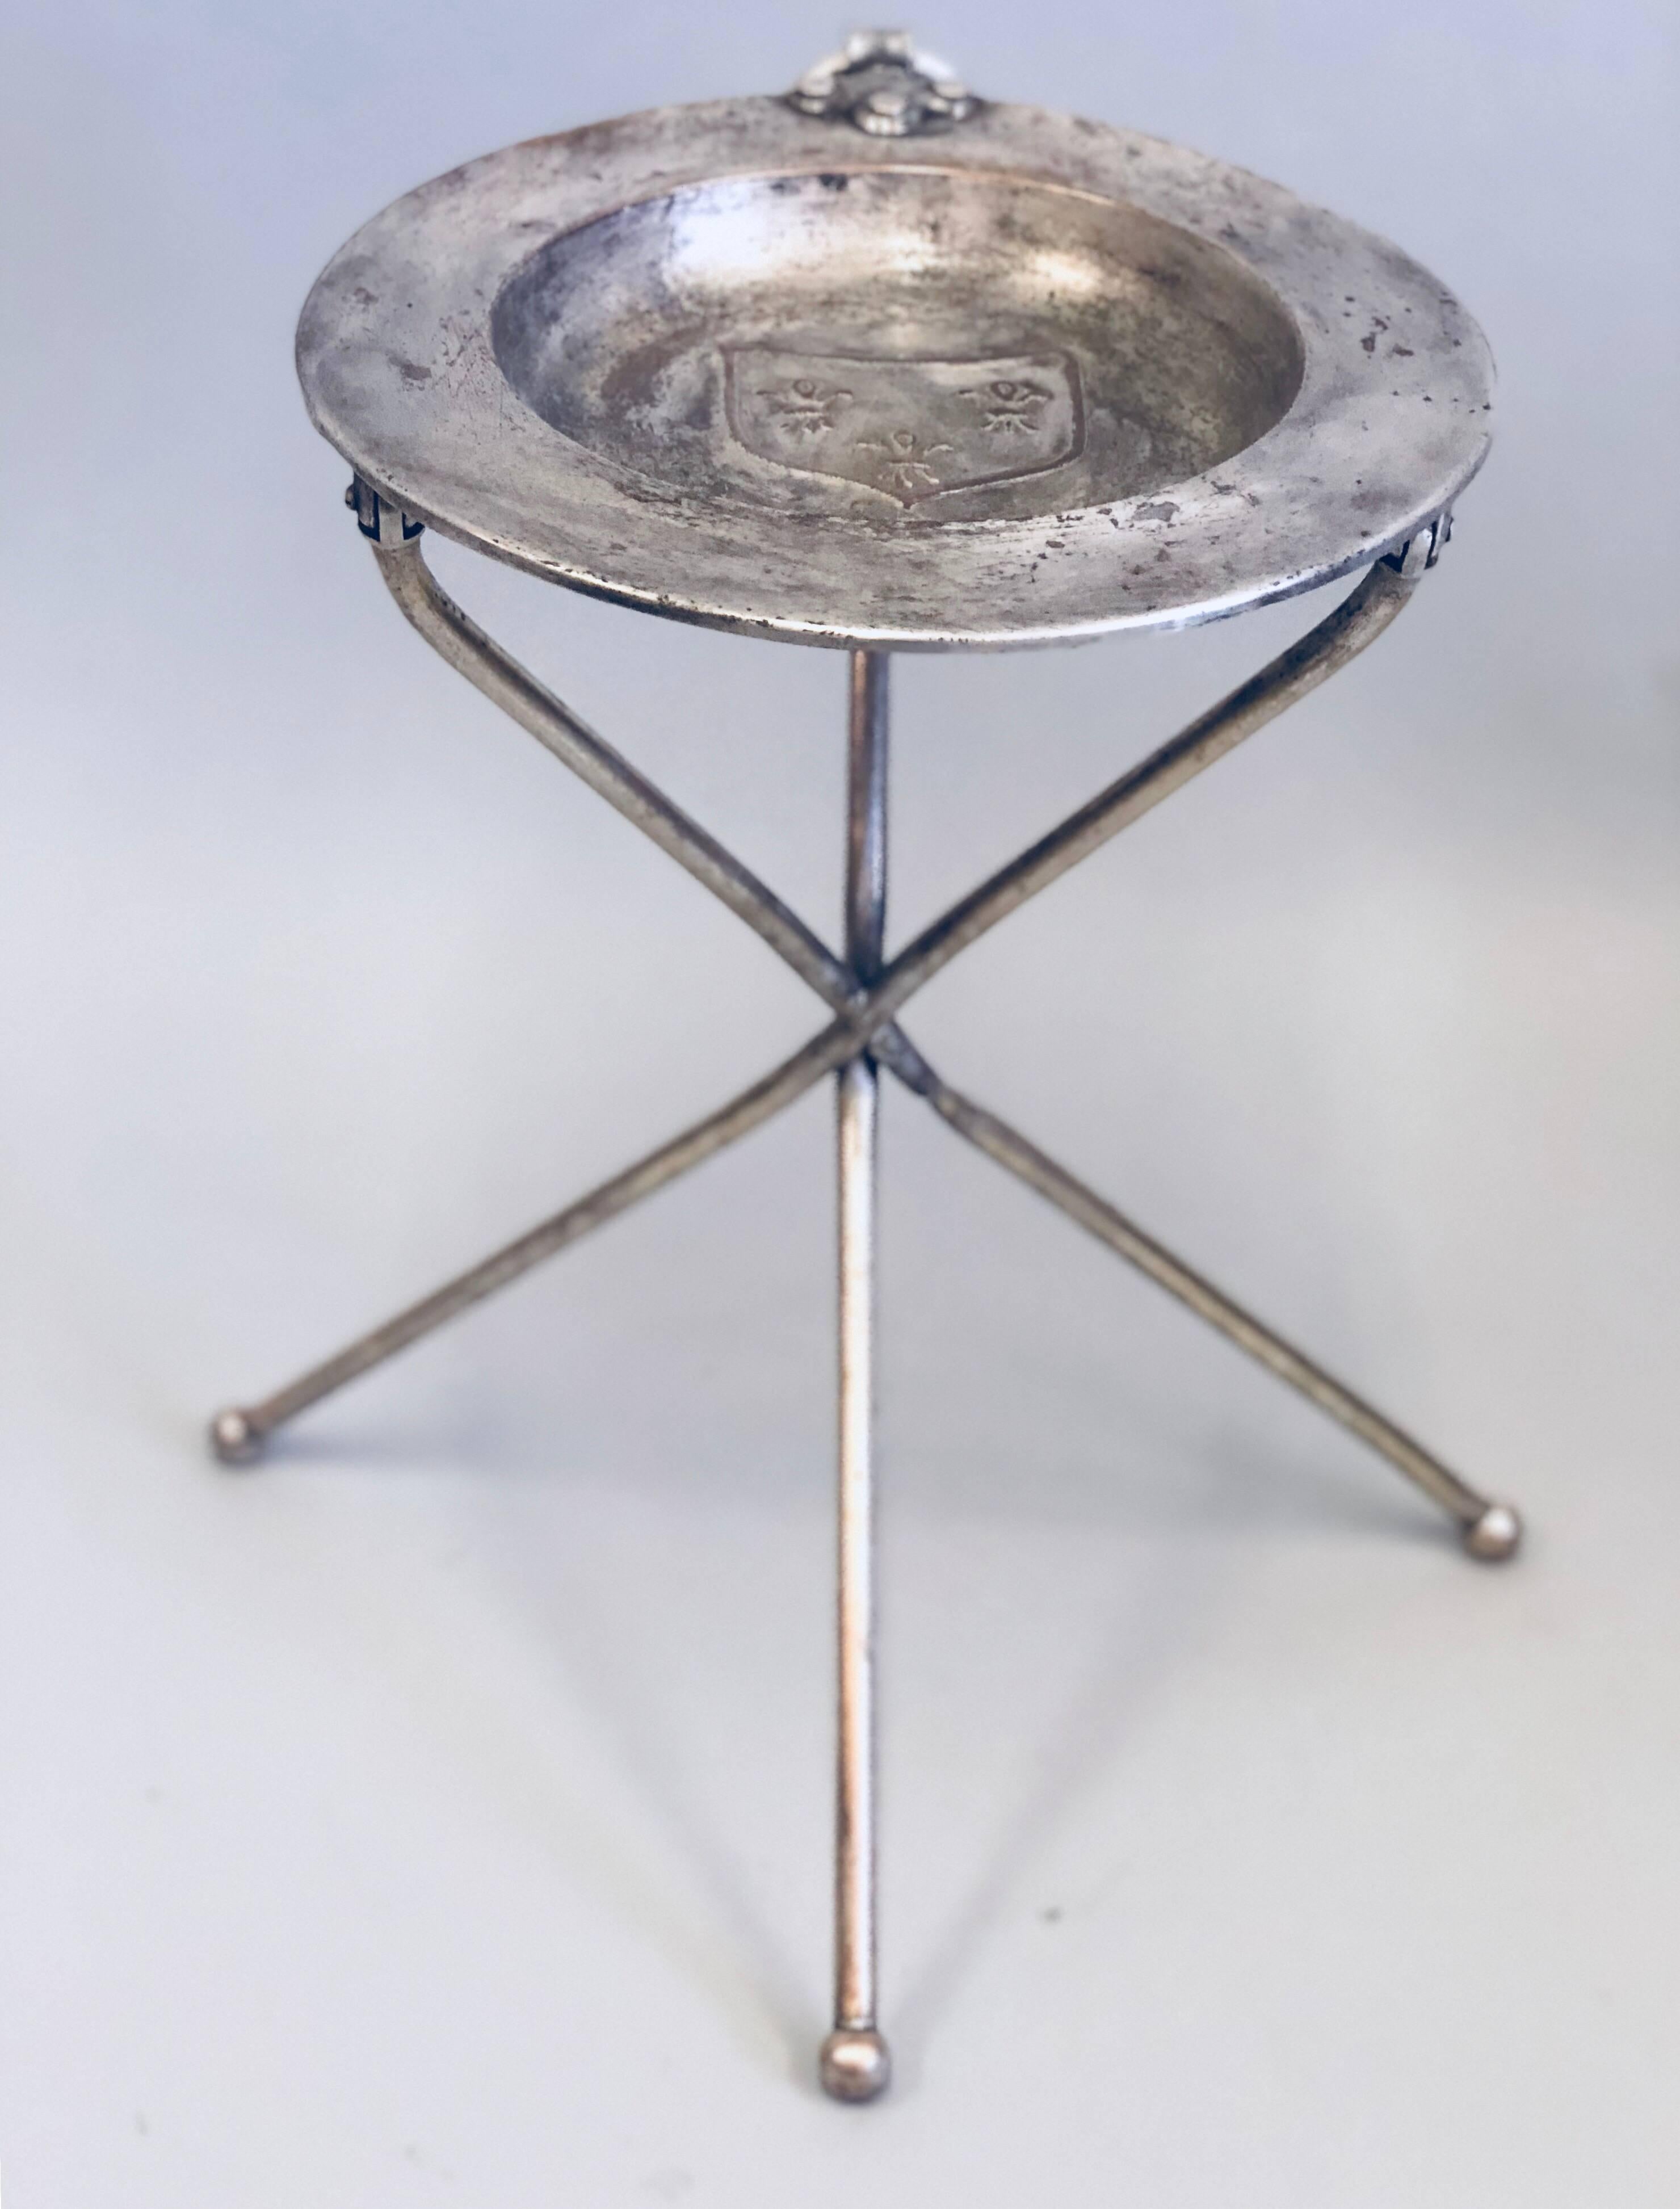 Elegant French modern neoclassical collapse-able tri-leg side table in silvered brass. 

The legs of this table will fold allowing it to be transported easily. The piece is finished with a coat of arms in the centre of the top. The patina is